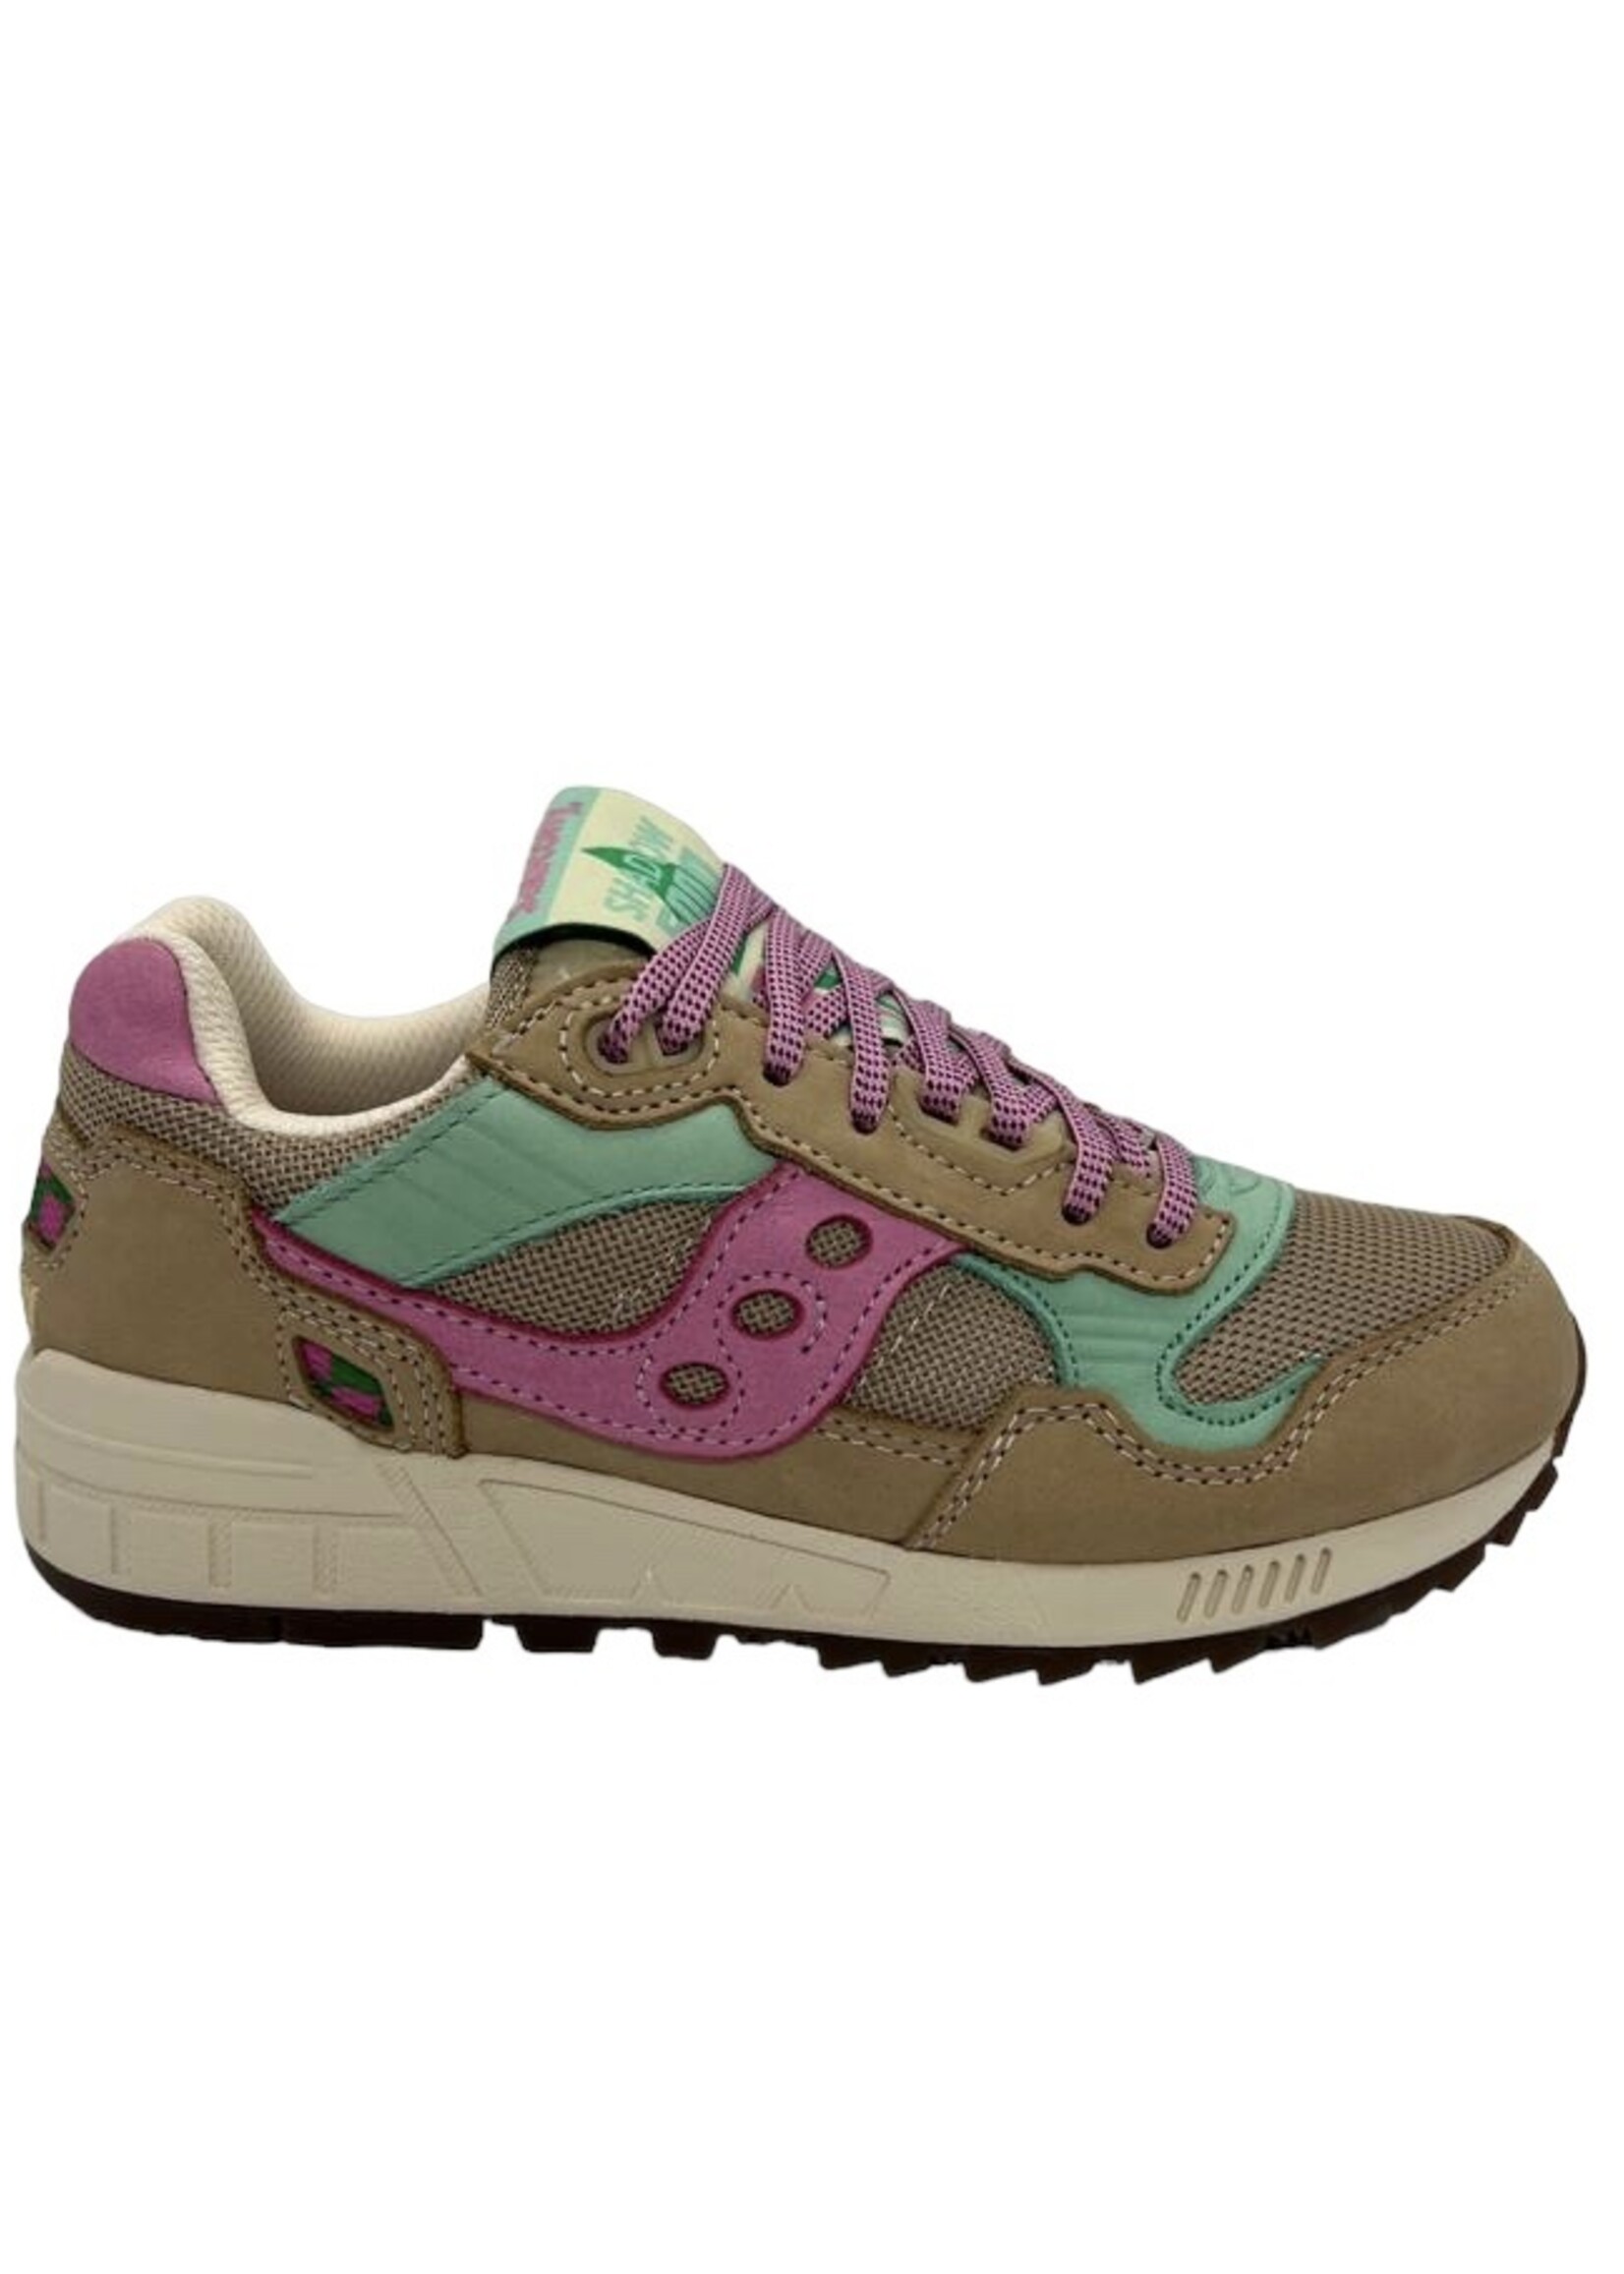 Saucony shadow 5000 earth citizen gray/pink